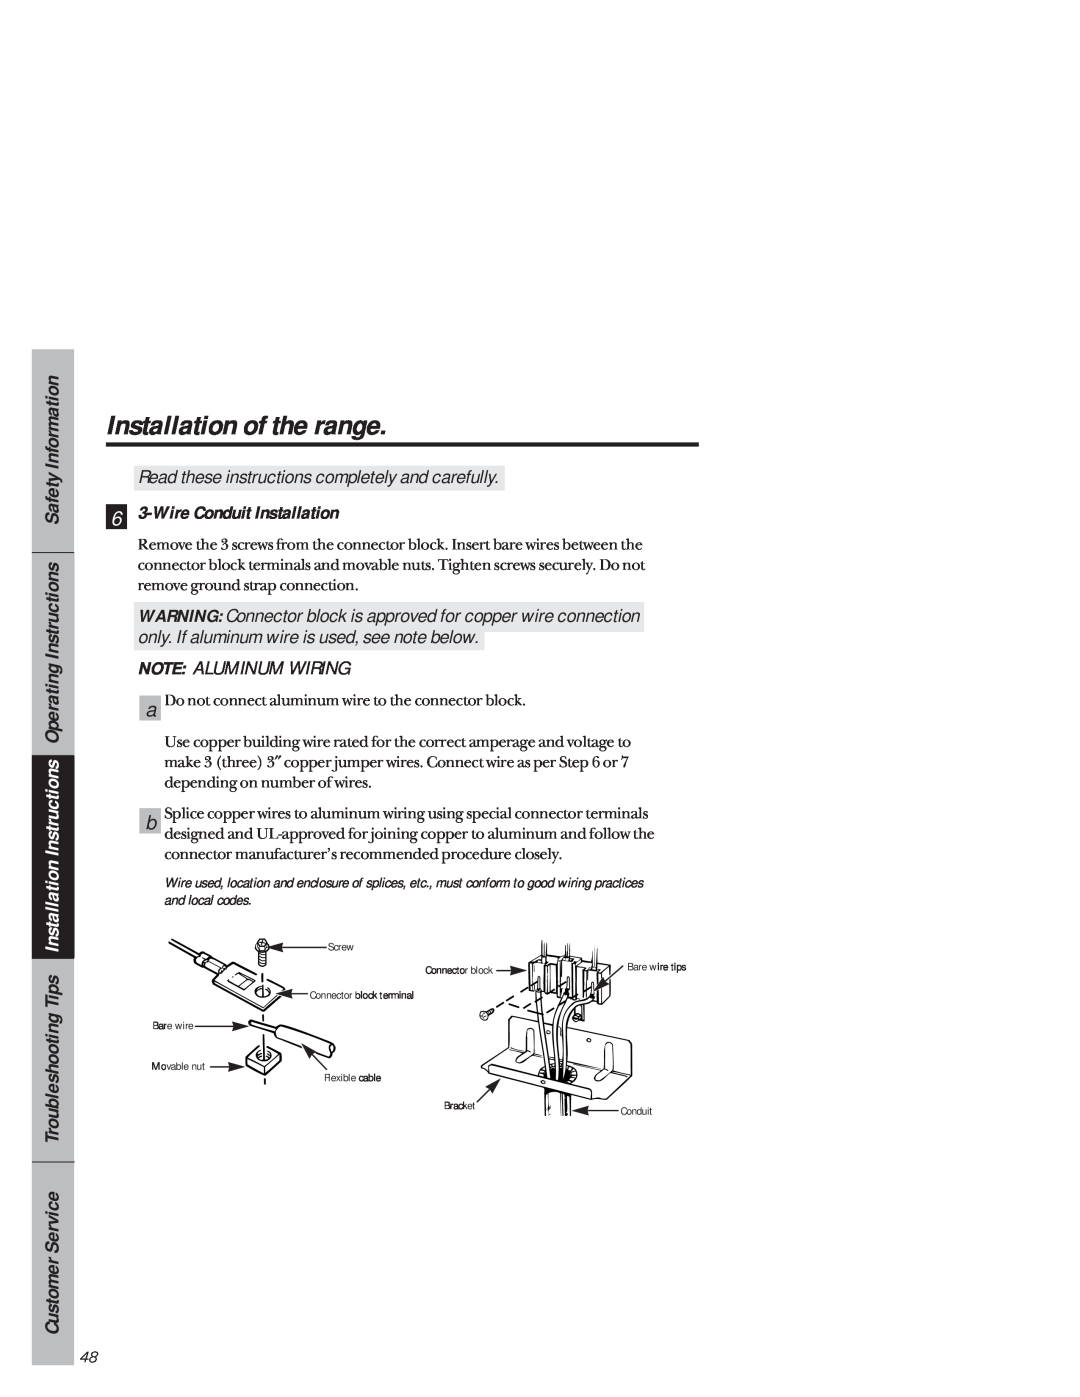 GE 49-8941, 164D3333P171 owner manual 6 3-Wire Conduit Installation, Note Aluminum Wiring, Installation of the range 